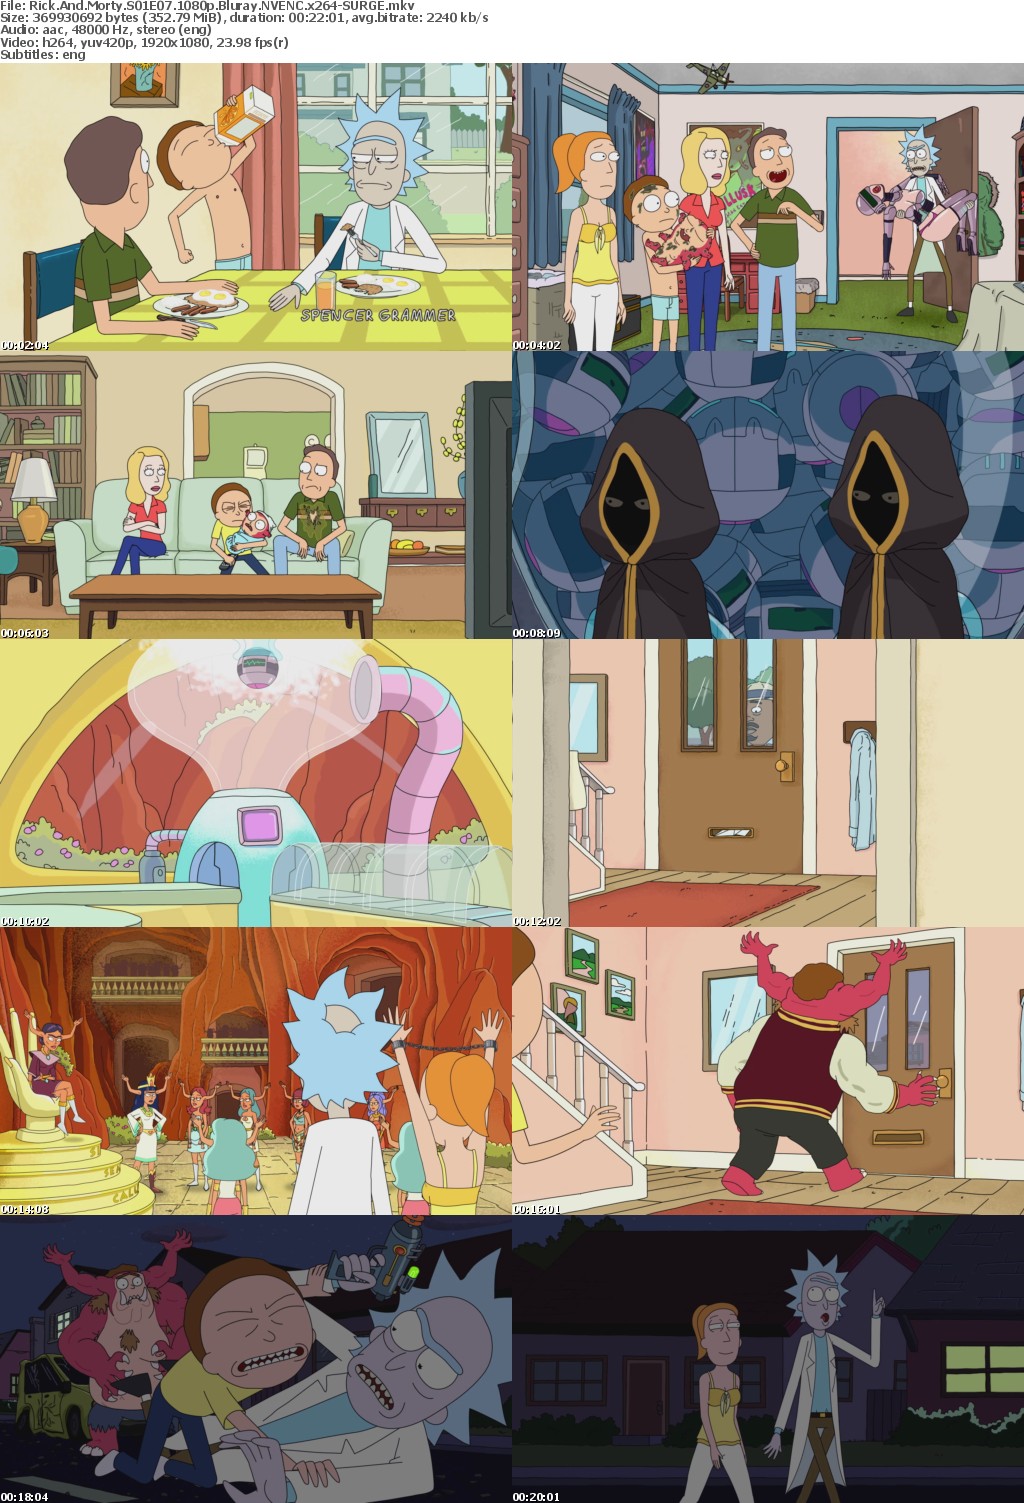 Rick And Morty S01 COMPLETE 1080p Bluray NVENC x264-SURGE